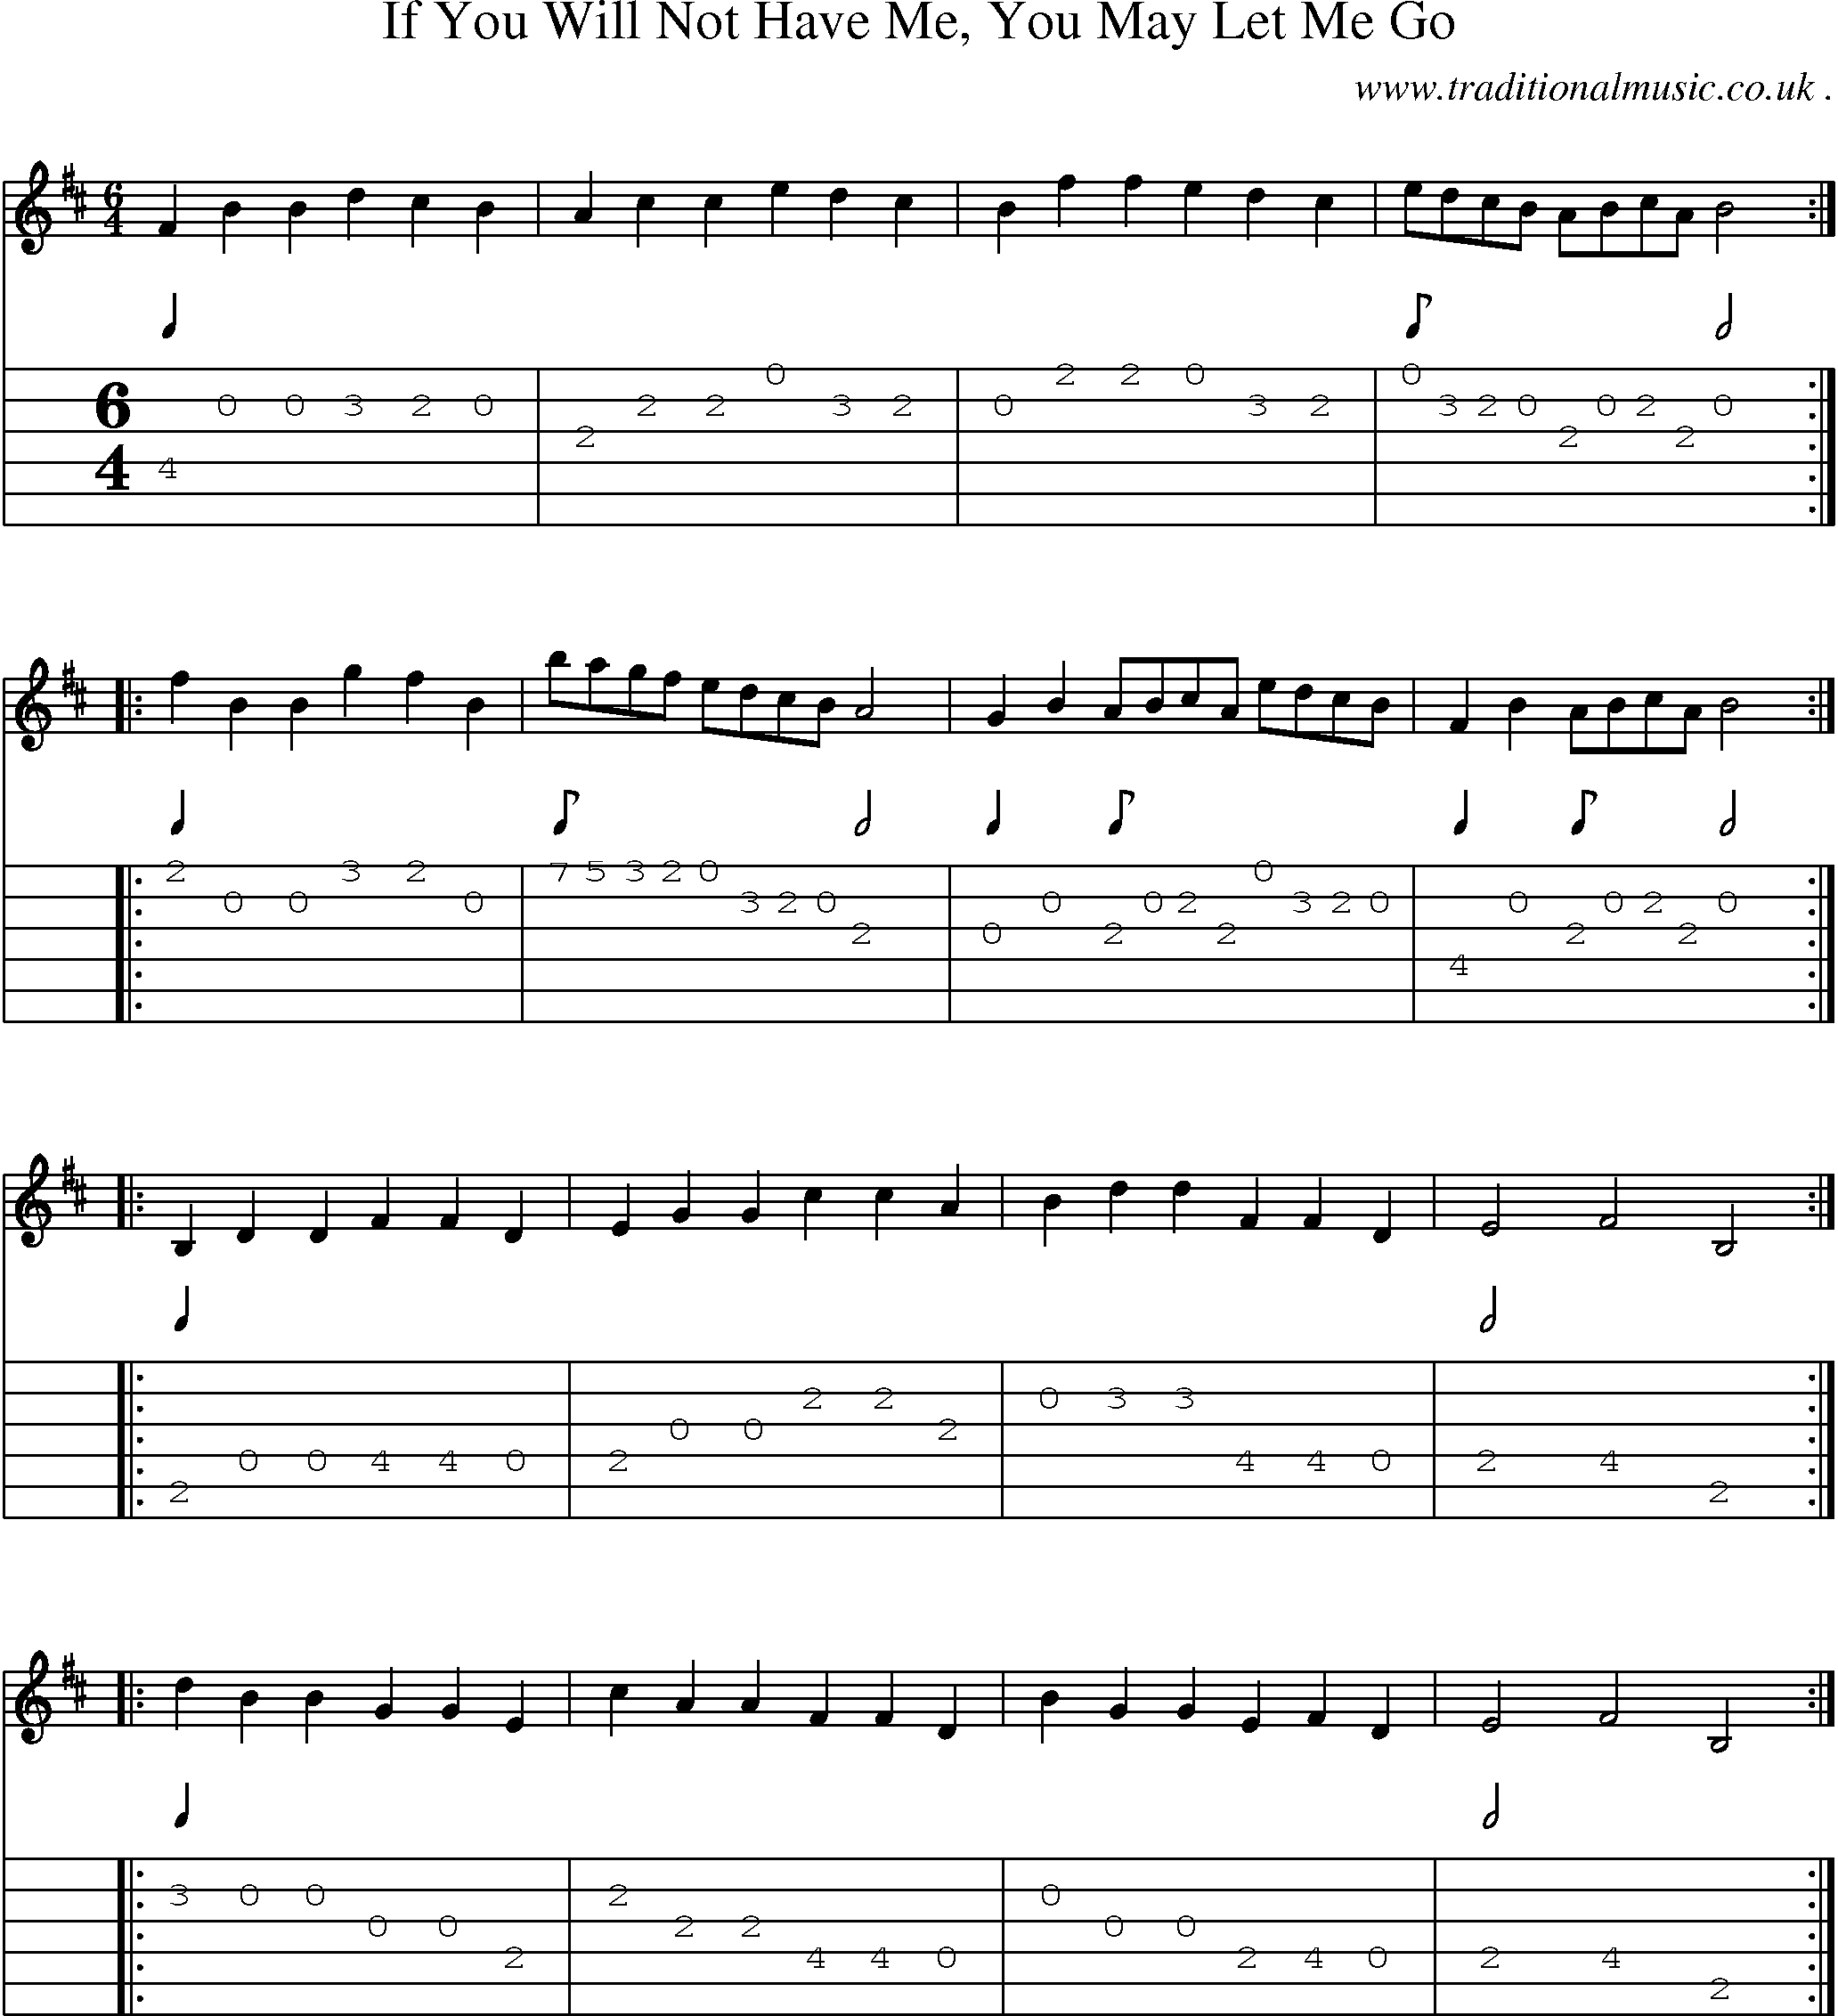 Sheet-Music and Guitar Tabs for If You Will Not Have Me You May Let Me Go